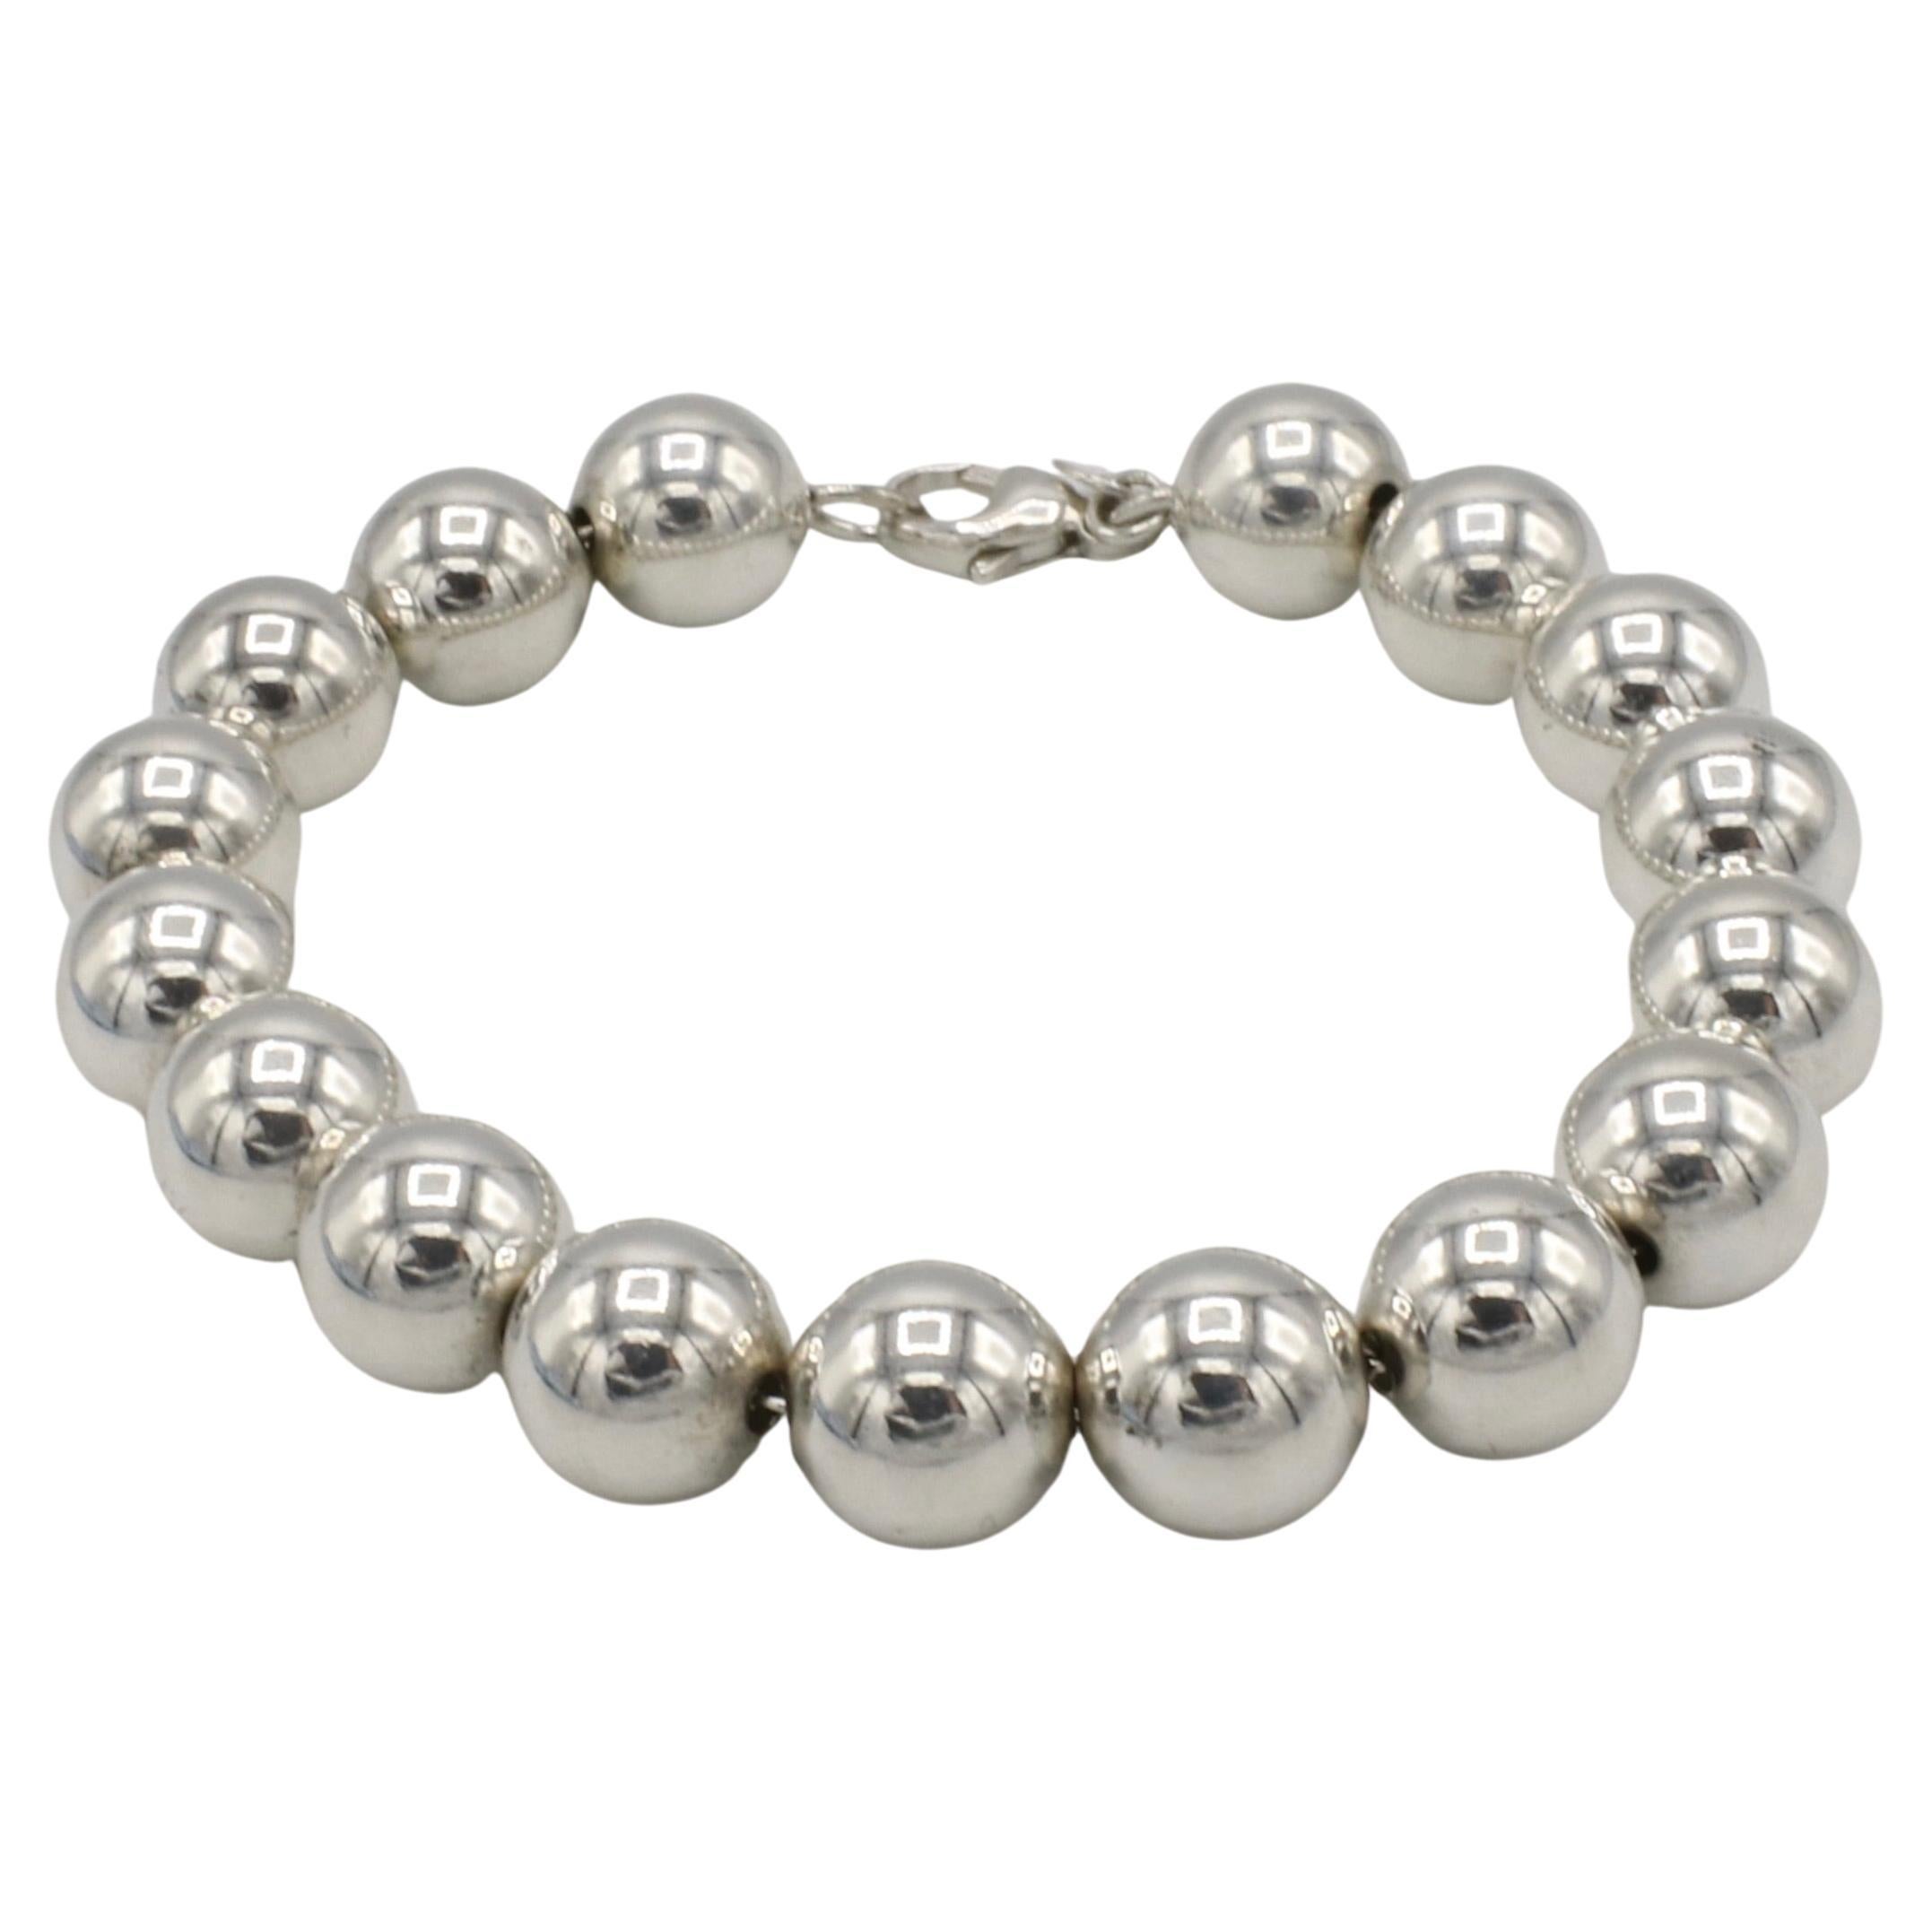 Tiffany & Co. HardWear Sterling Silver Ball Bead Bracelet 
Metal: Sterling silver
Weight: 18.67 grams
Width: 10mm
Length:  7 inches
Retail: $525 USD